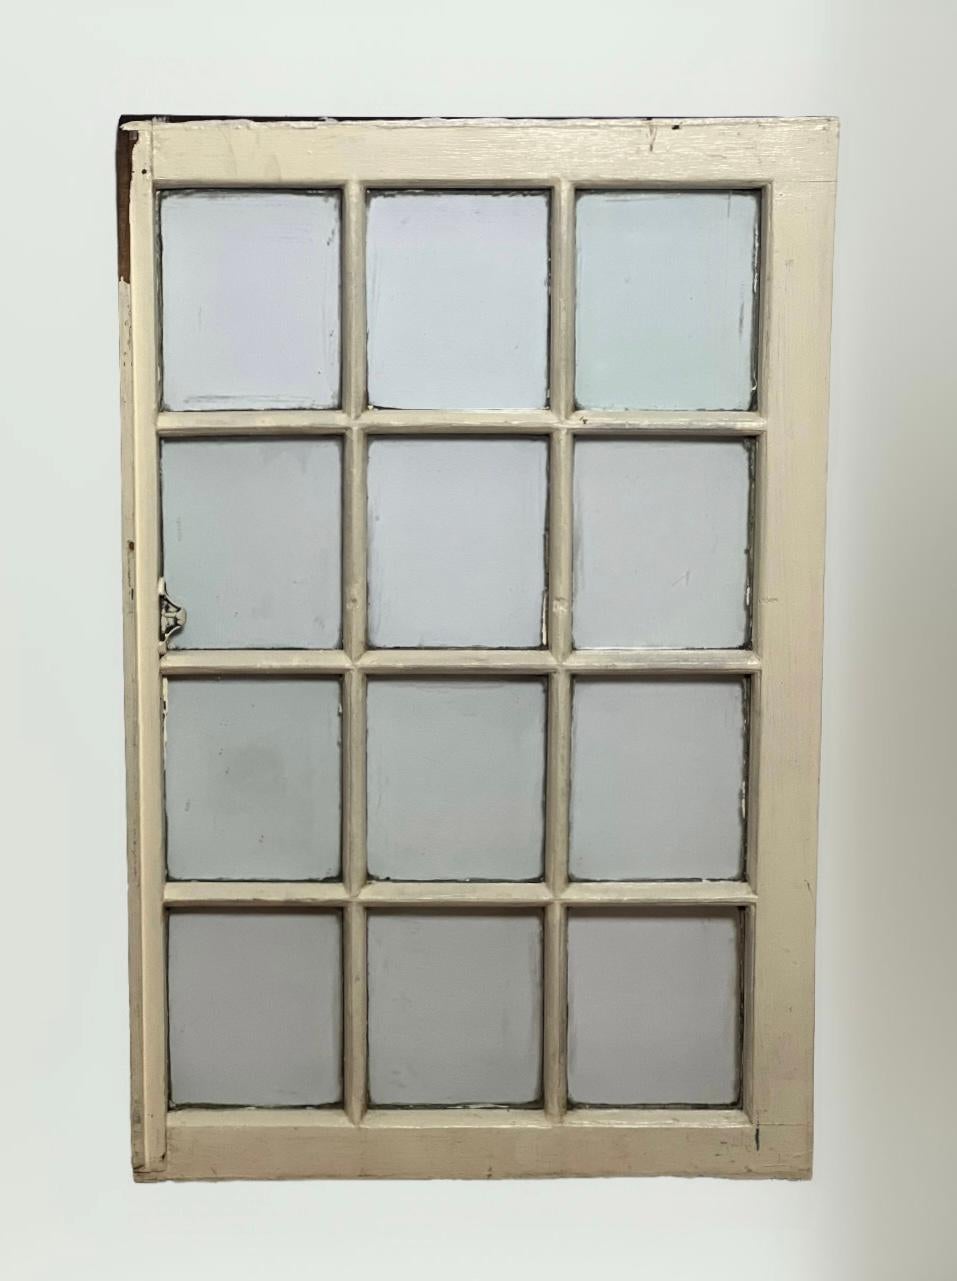 19th Century Rustic Painted Wood 12-Pane Window Sash with Original Glass In Good Condition For Sale In Doylestown, PA